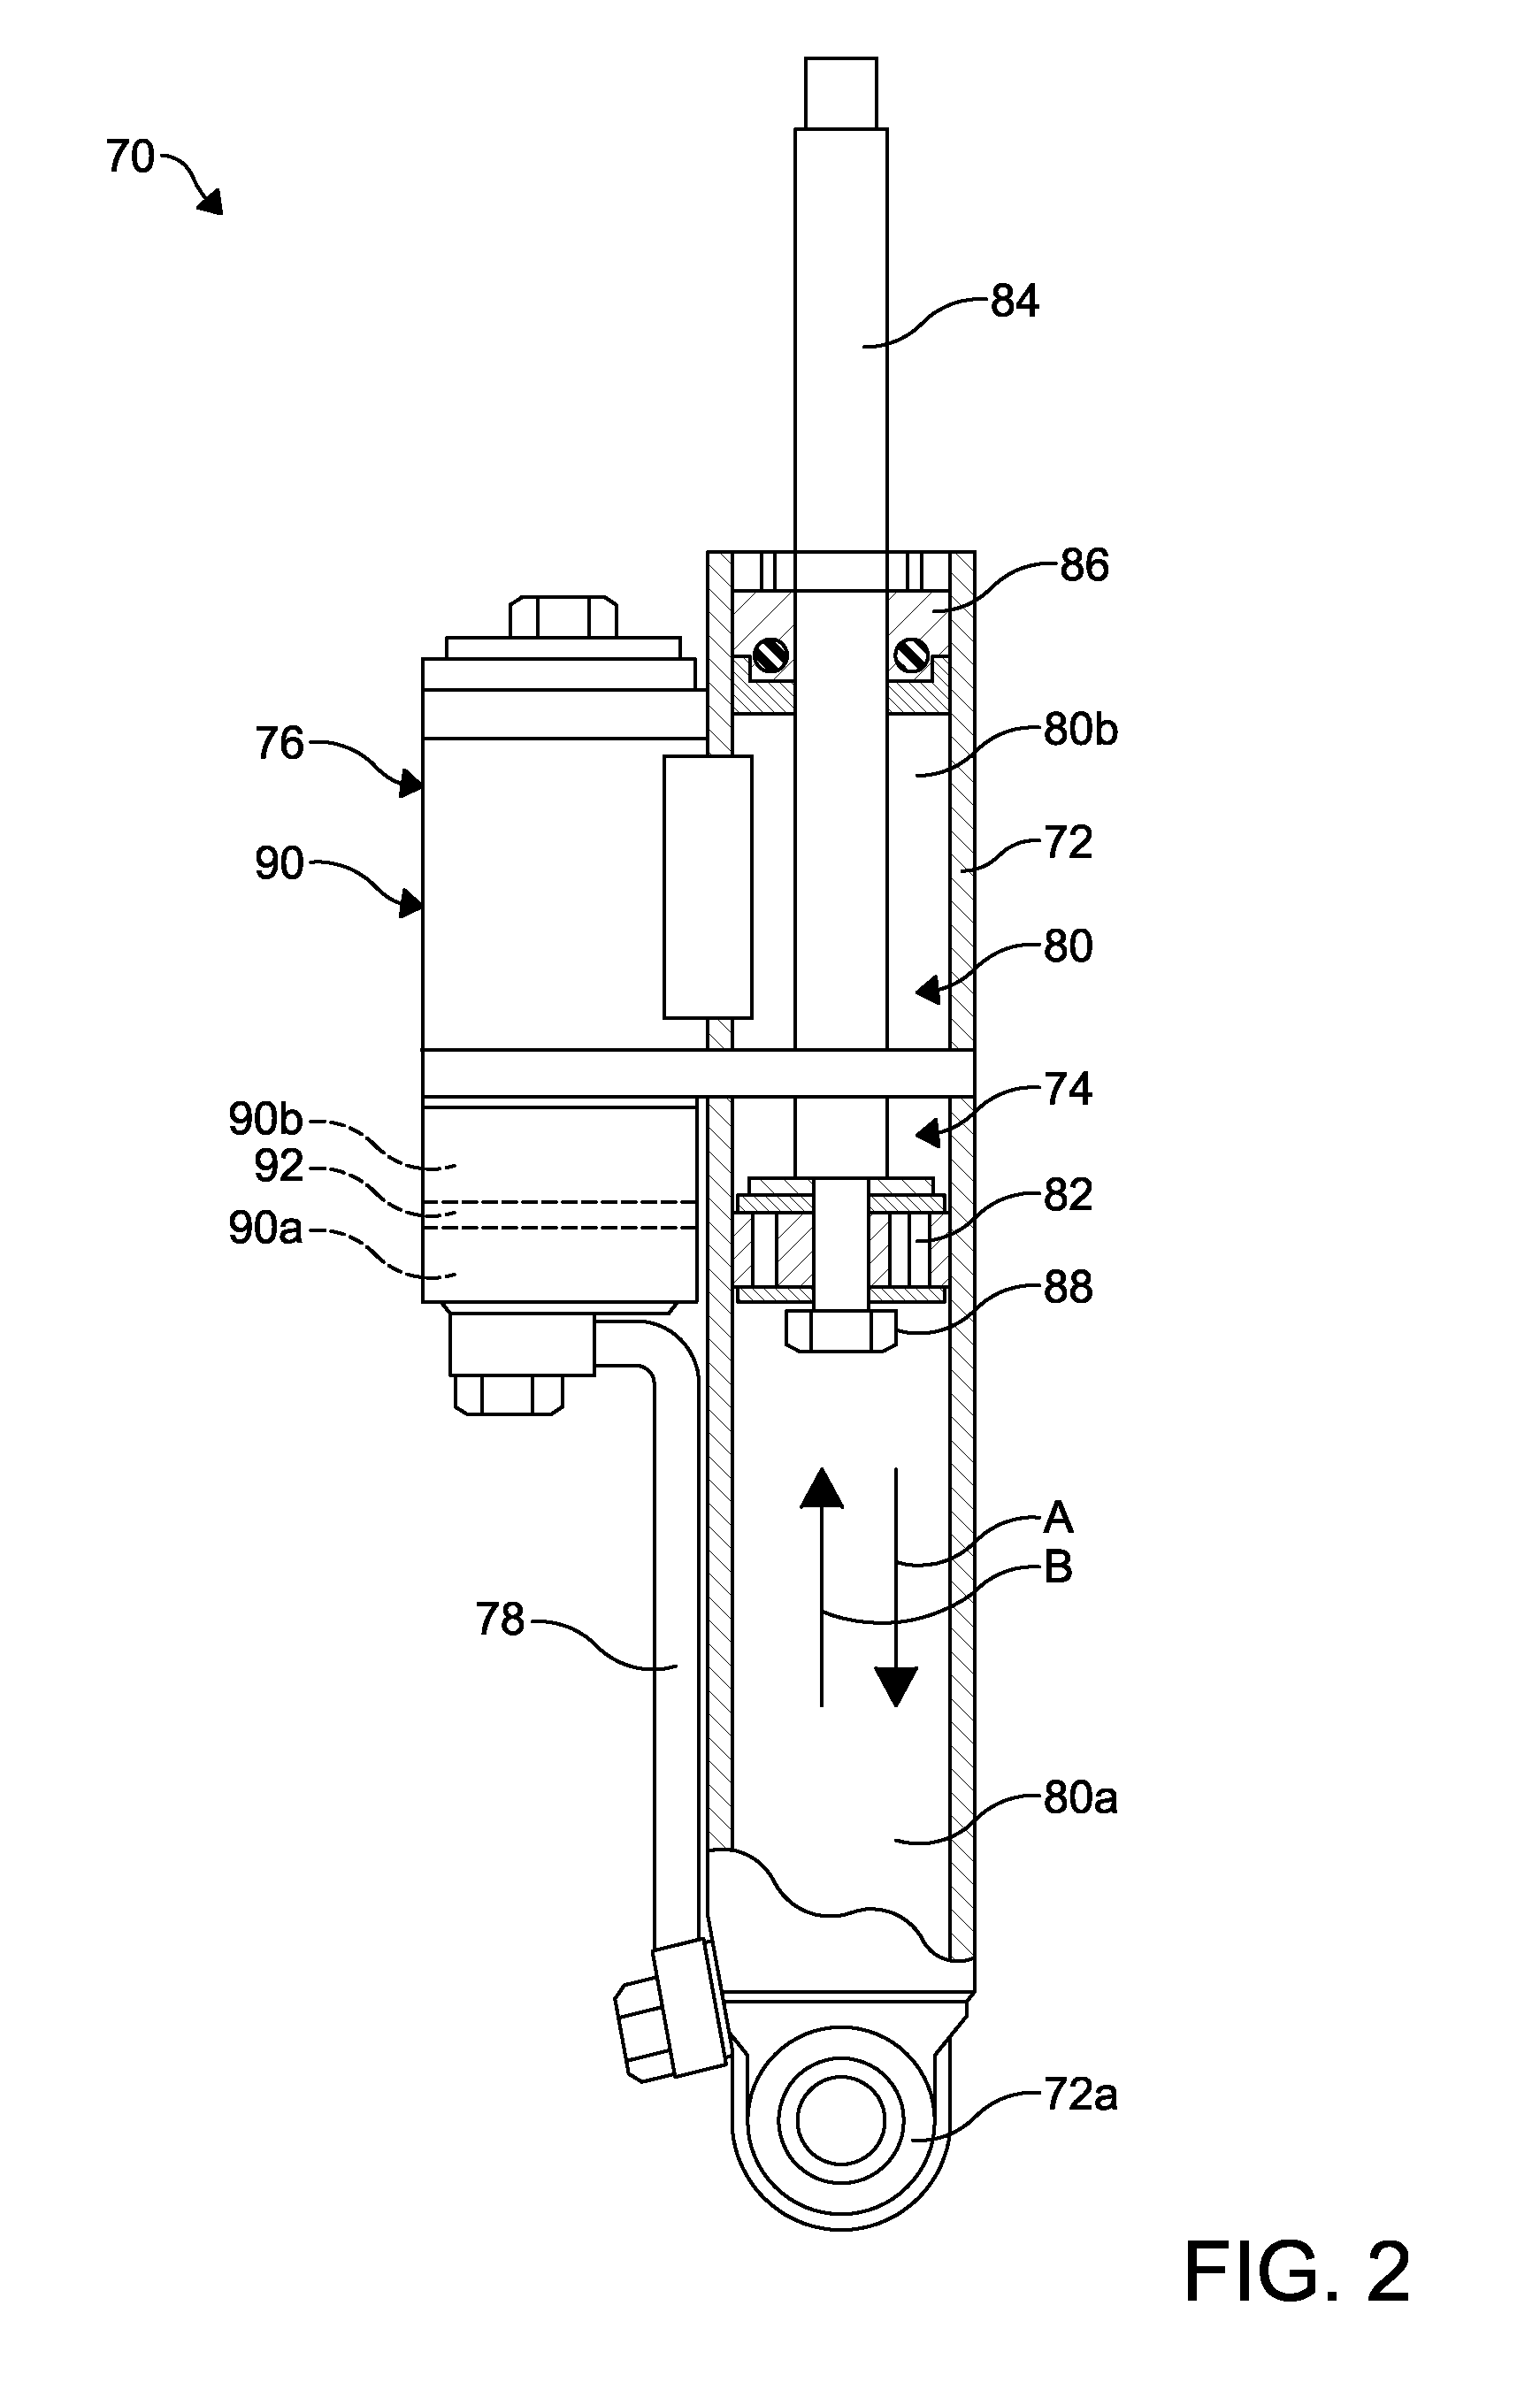 Three Speed Adjustable Shock Absorber Having One Or More Microvalves